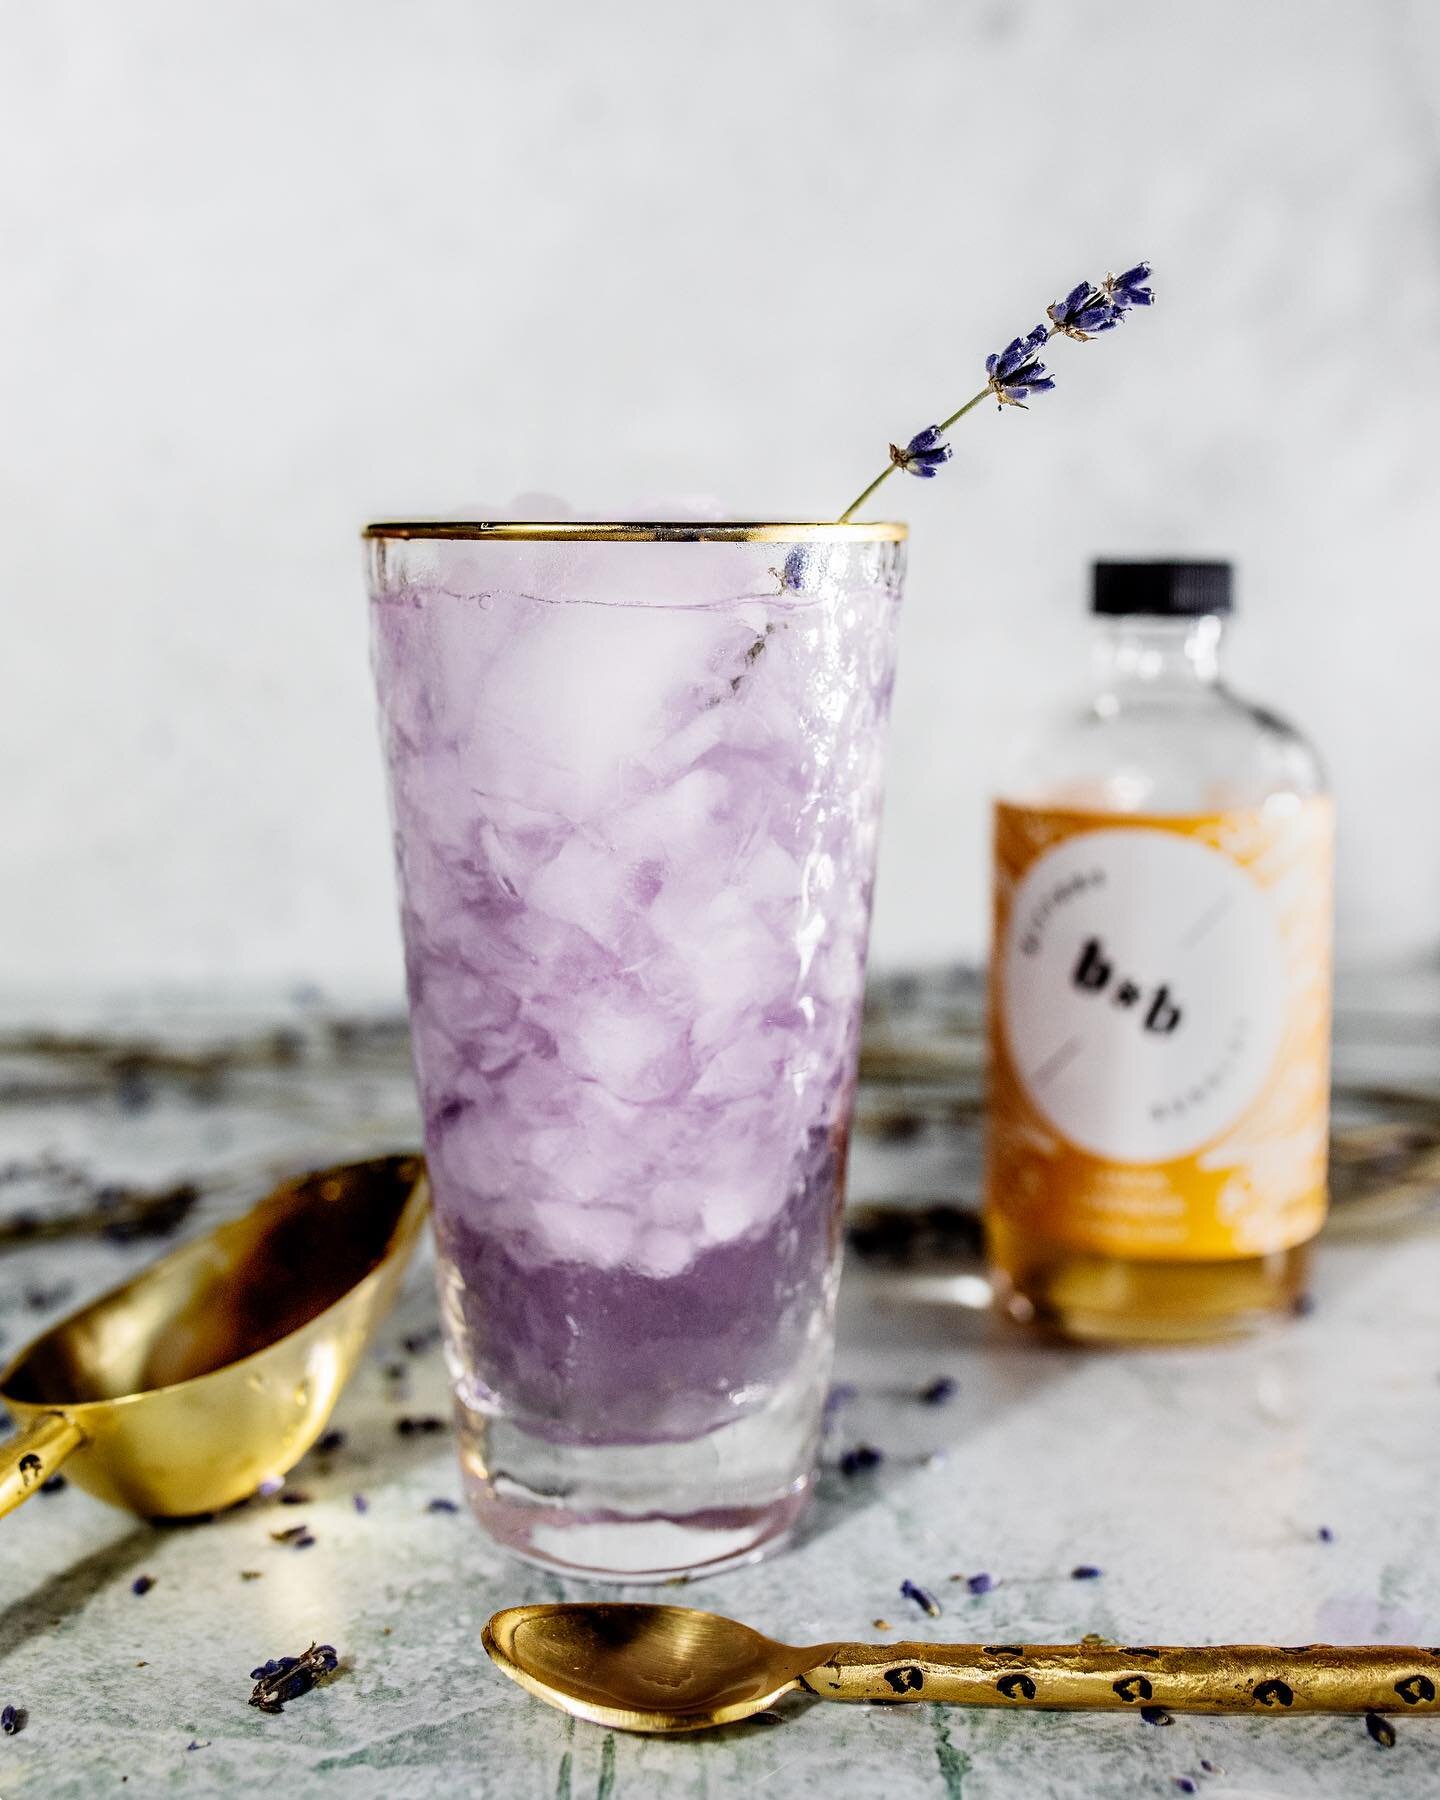 Sipping on a Lavender Lemonade Cocktail on this warm day hits oh so perfectly 😌😌 In case you missed the easy recipe&hellip;.

You'll need:
2 oz of @empress1908gin
1.5 oz @bittersandbubbles Lemon Lavender Syrup
Ice
Tonic water
What you'll do:
Pour g